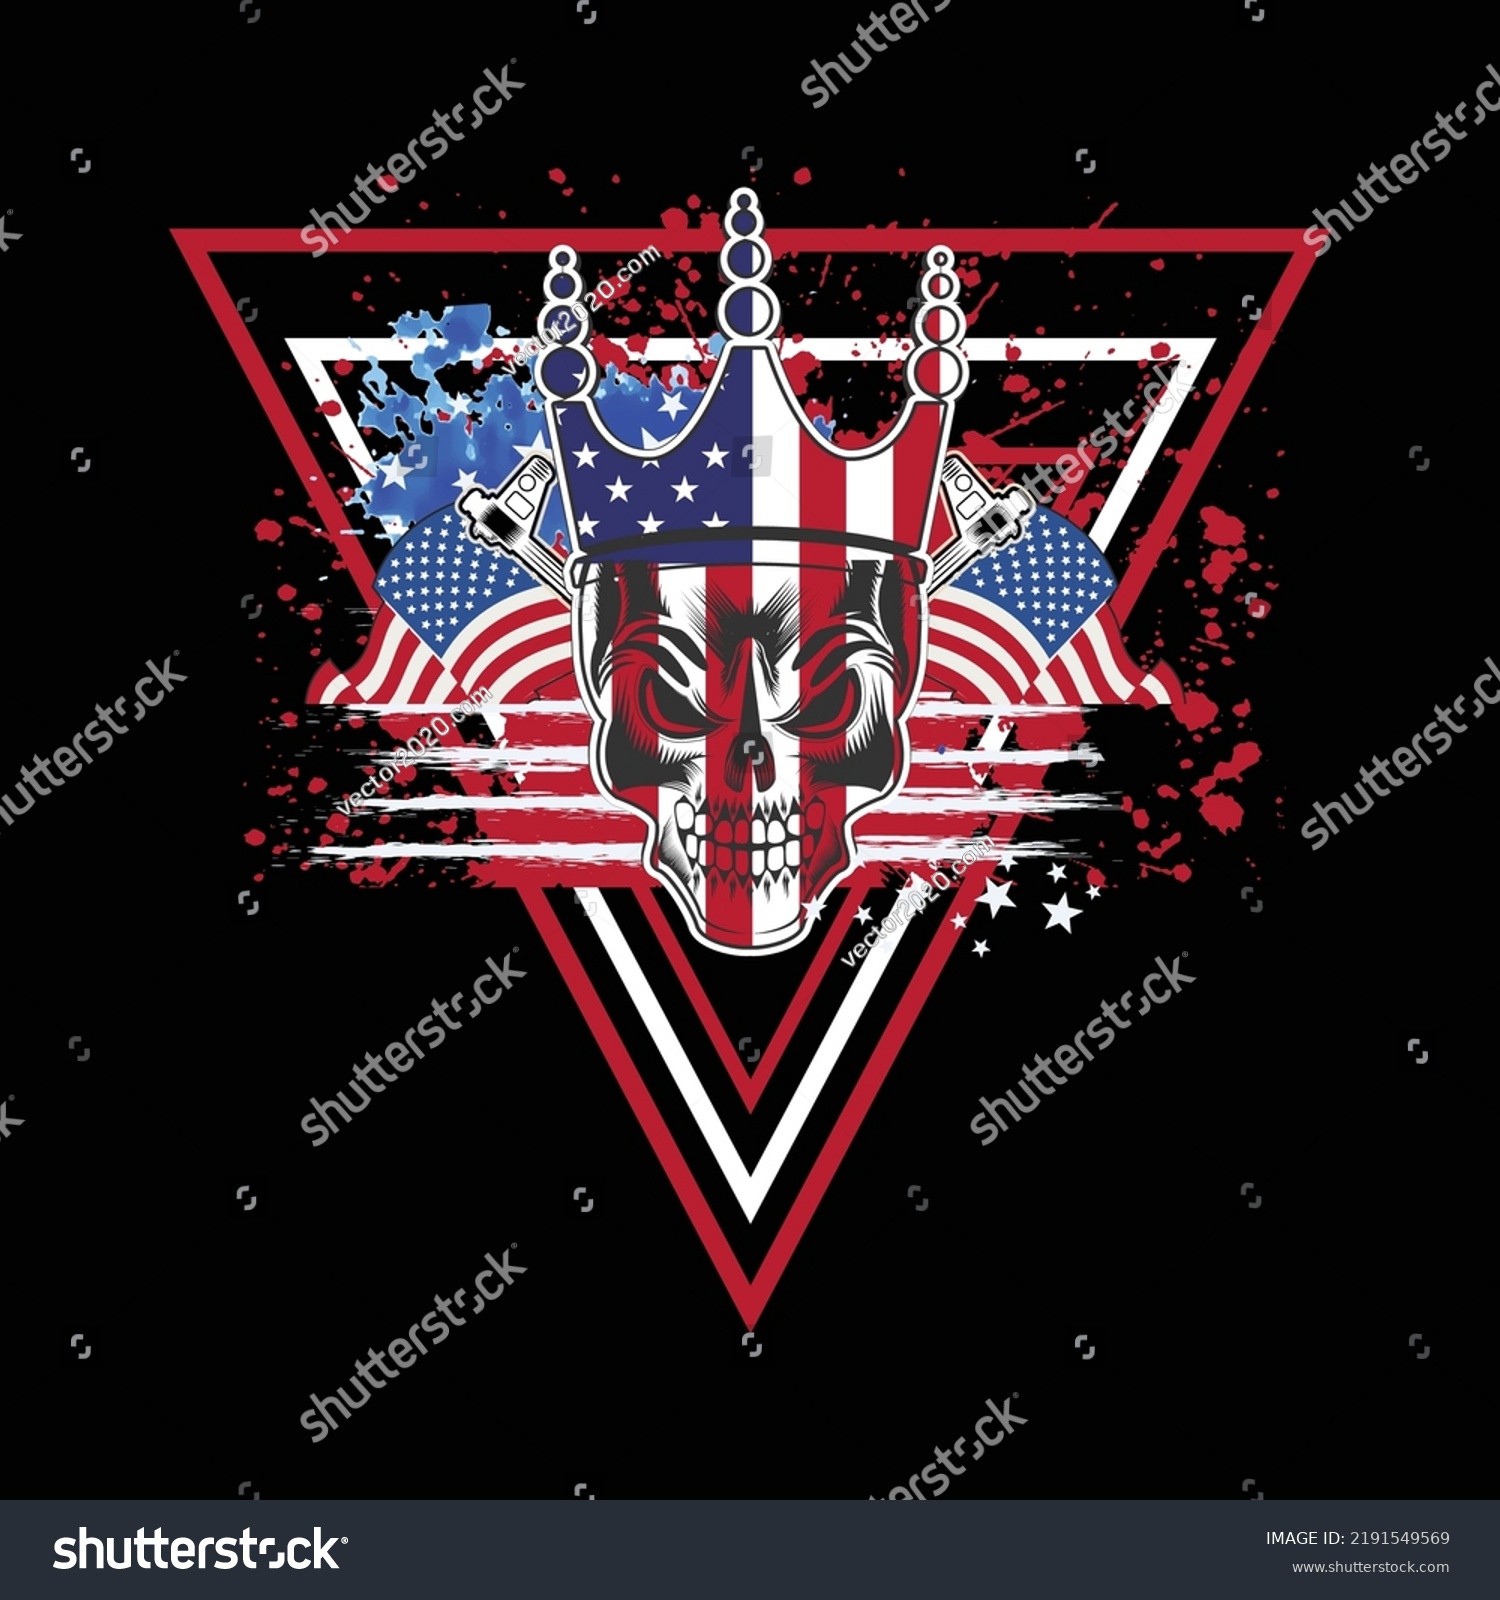 SVG of American Flag With skull Design T-shirt design, With This Instant Download, Which Includes: - Eps file, File Size : 2500 X 2500 Pixels. svg